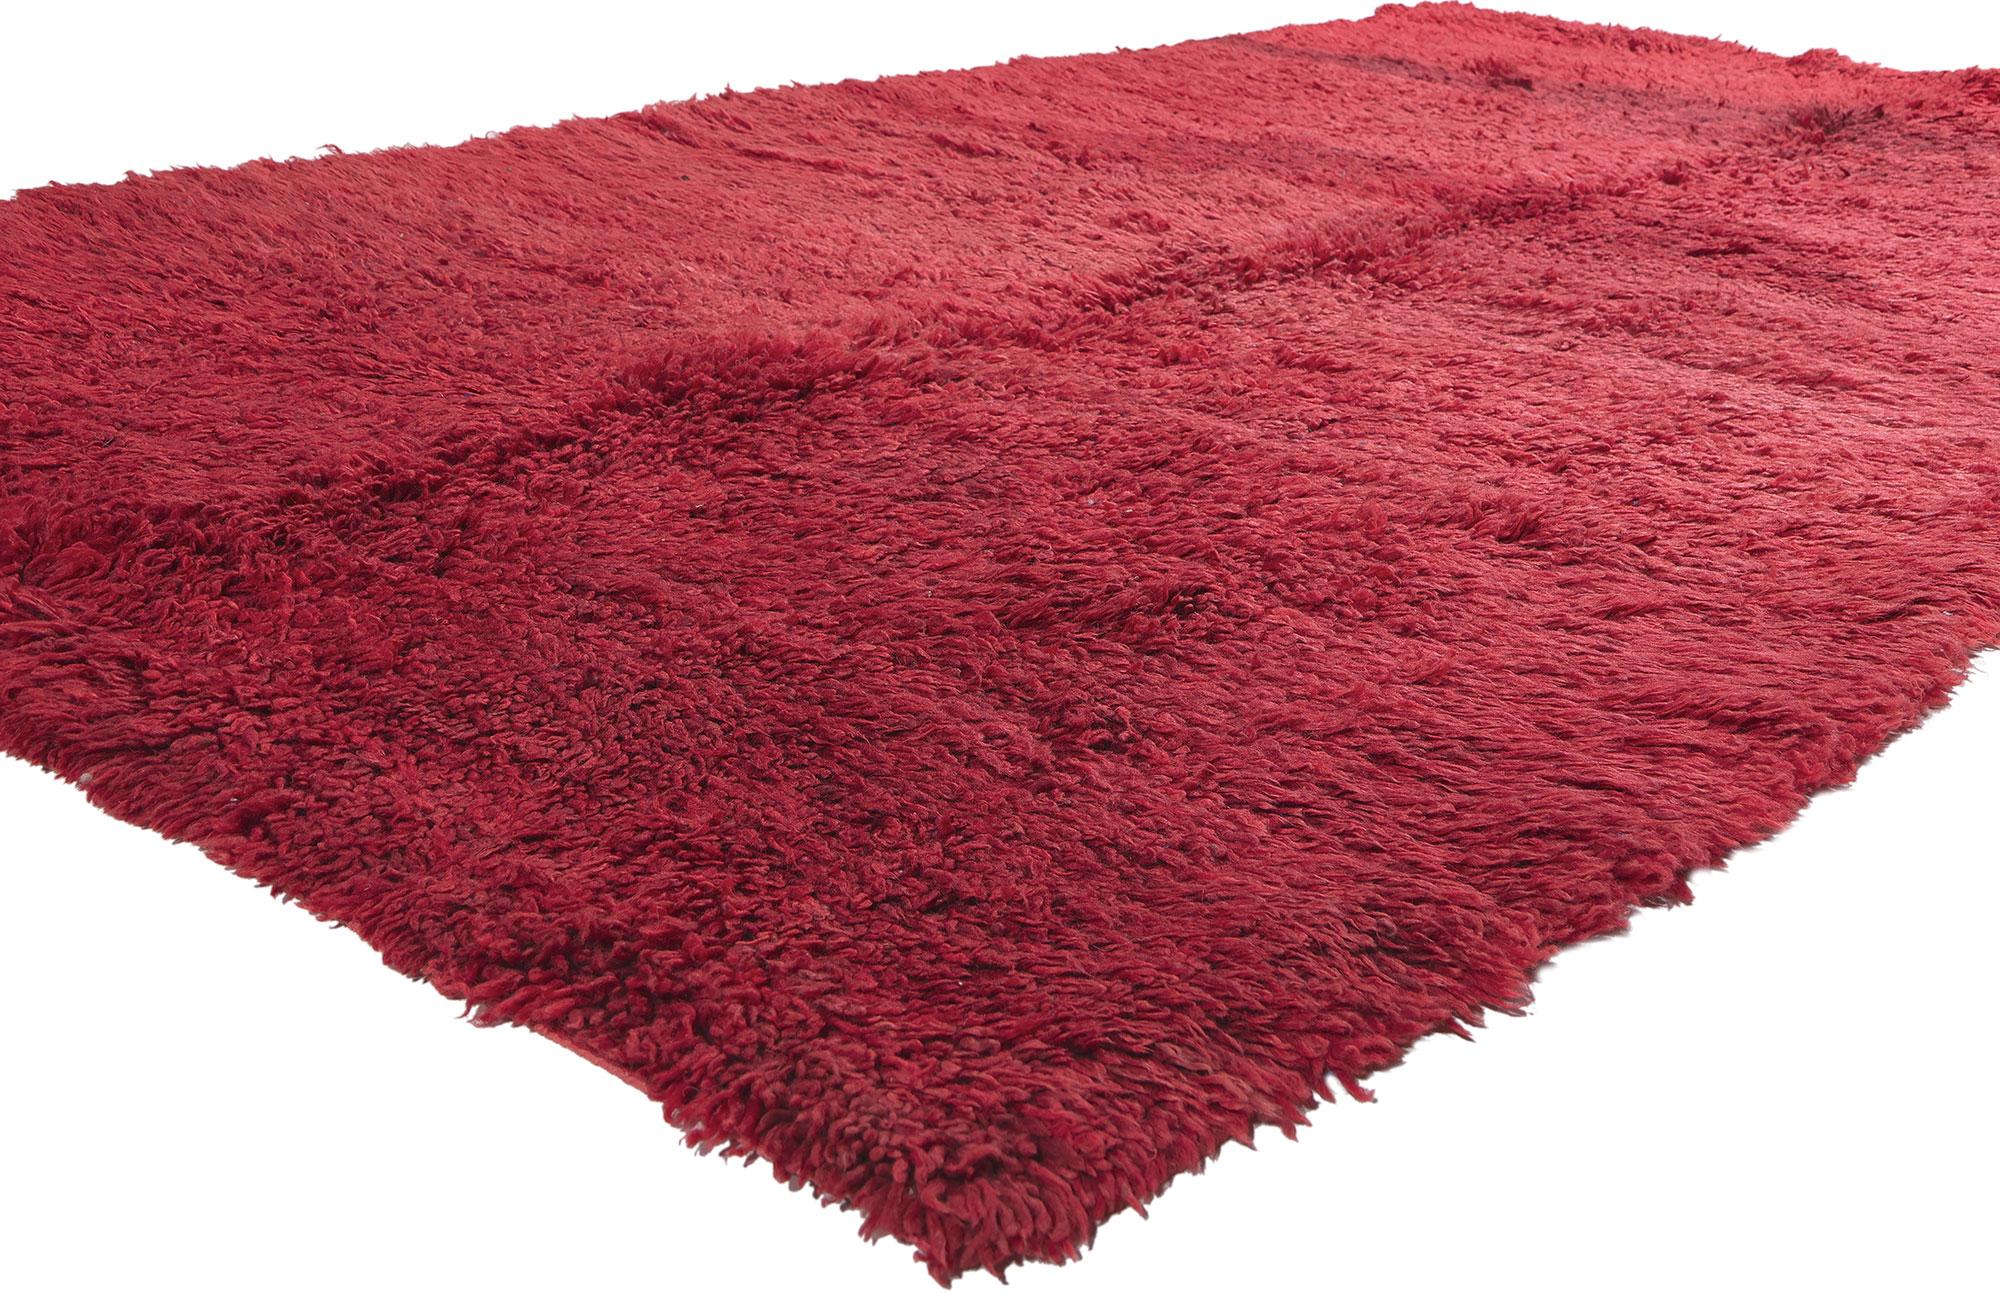 20942 Vintage Red Moroccan Rug, 05'05 x 08'08. Embark on a journey through the captivating world of Maximalist aesthetics as you explore the charm of this hand-knotted wool vintage Beni Mguild Moroccan rug—a masterpiece born in the western central